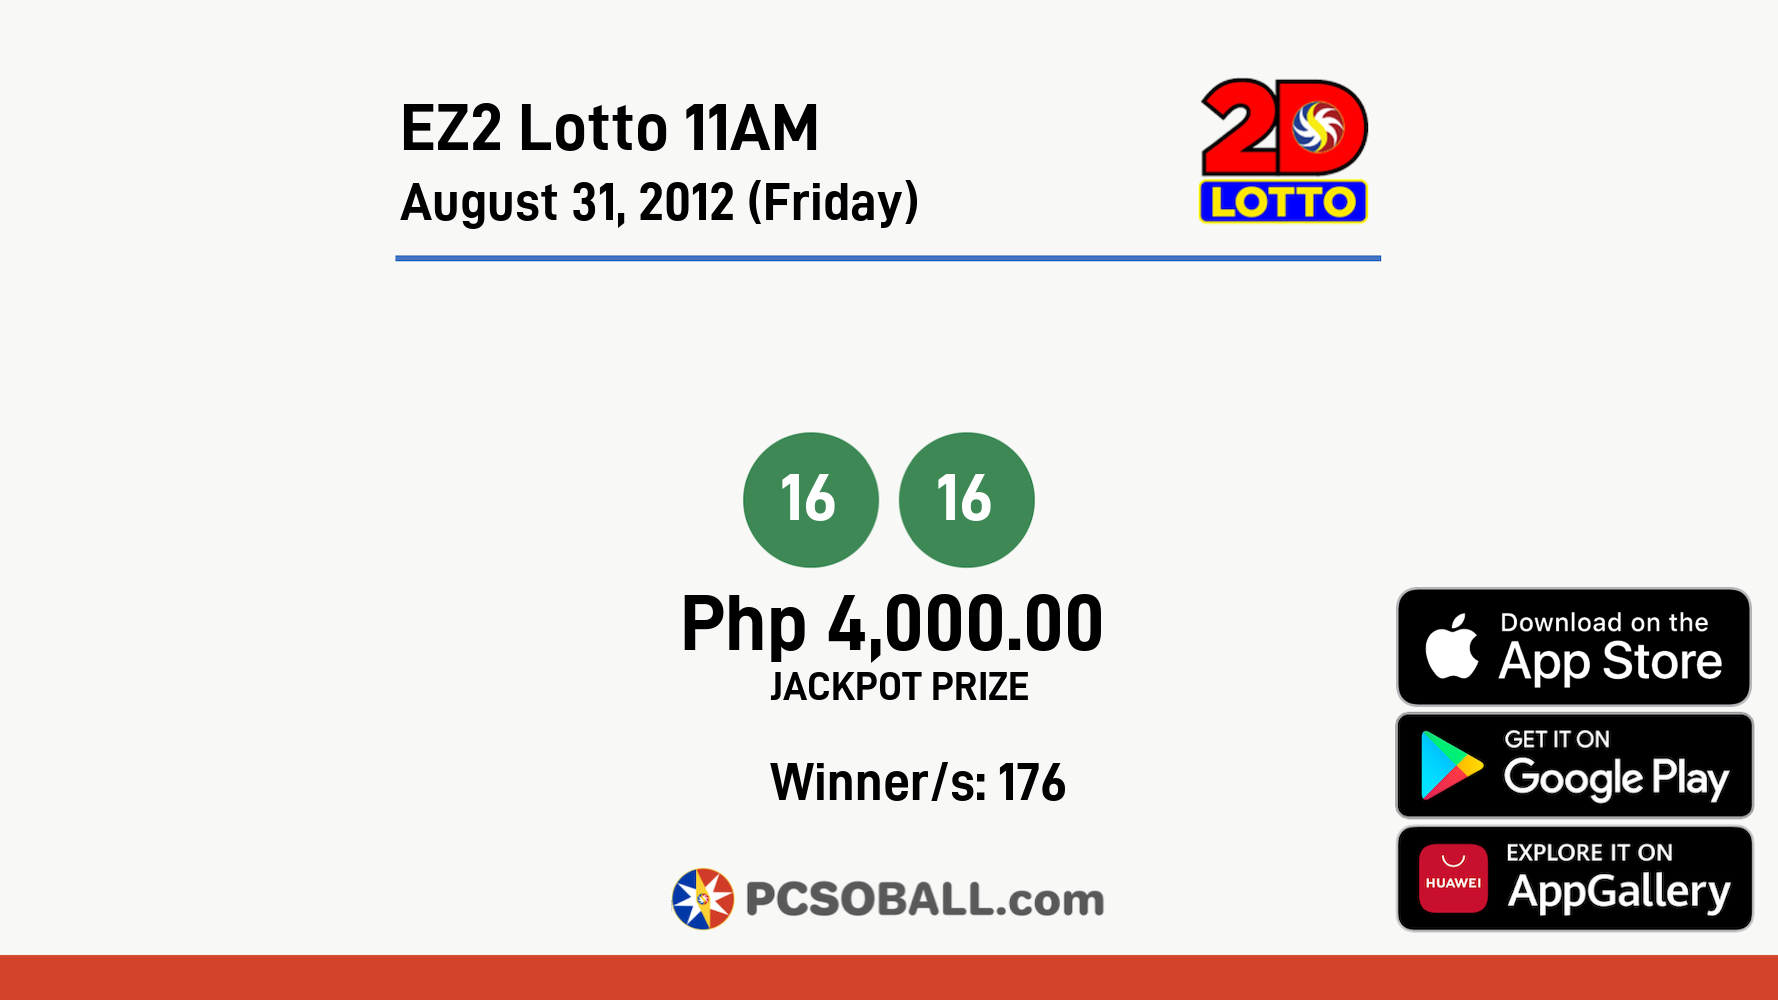 EZ2 Lotto 11AM August 31, 2012 (Friday) Result